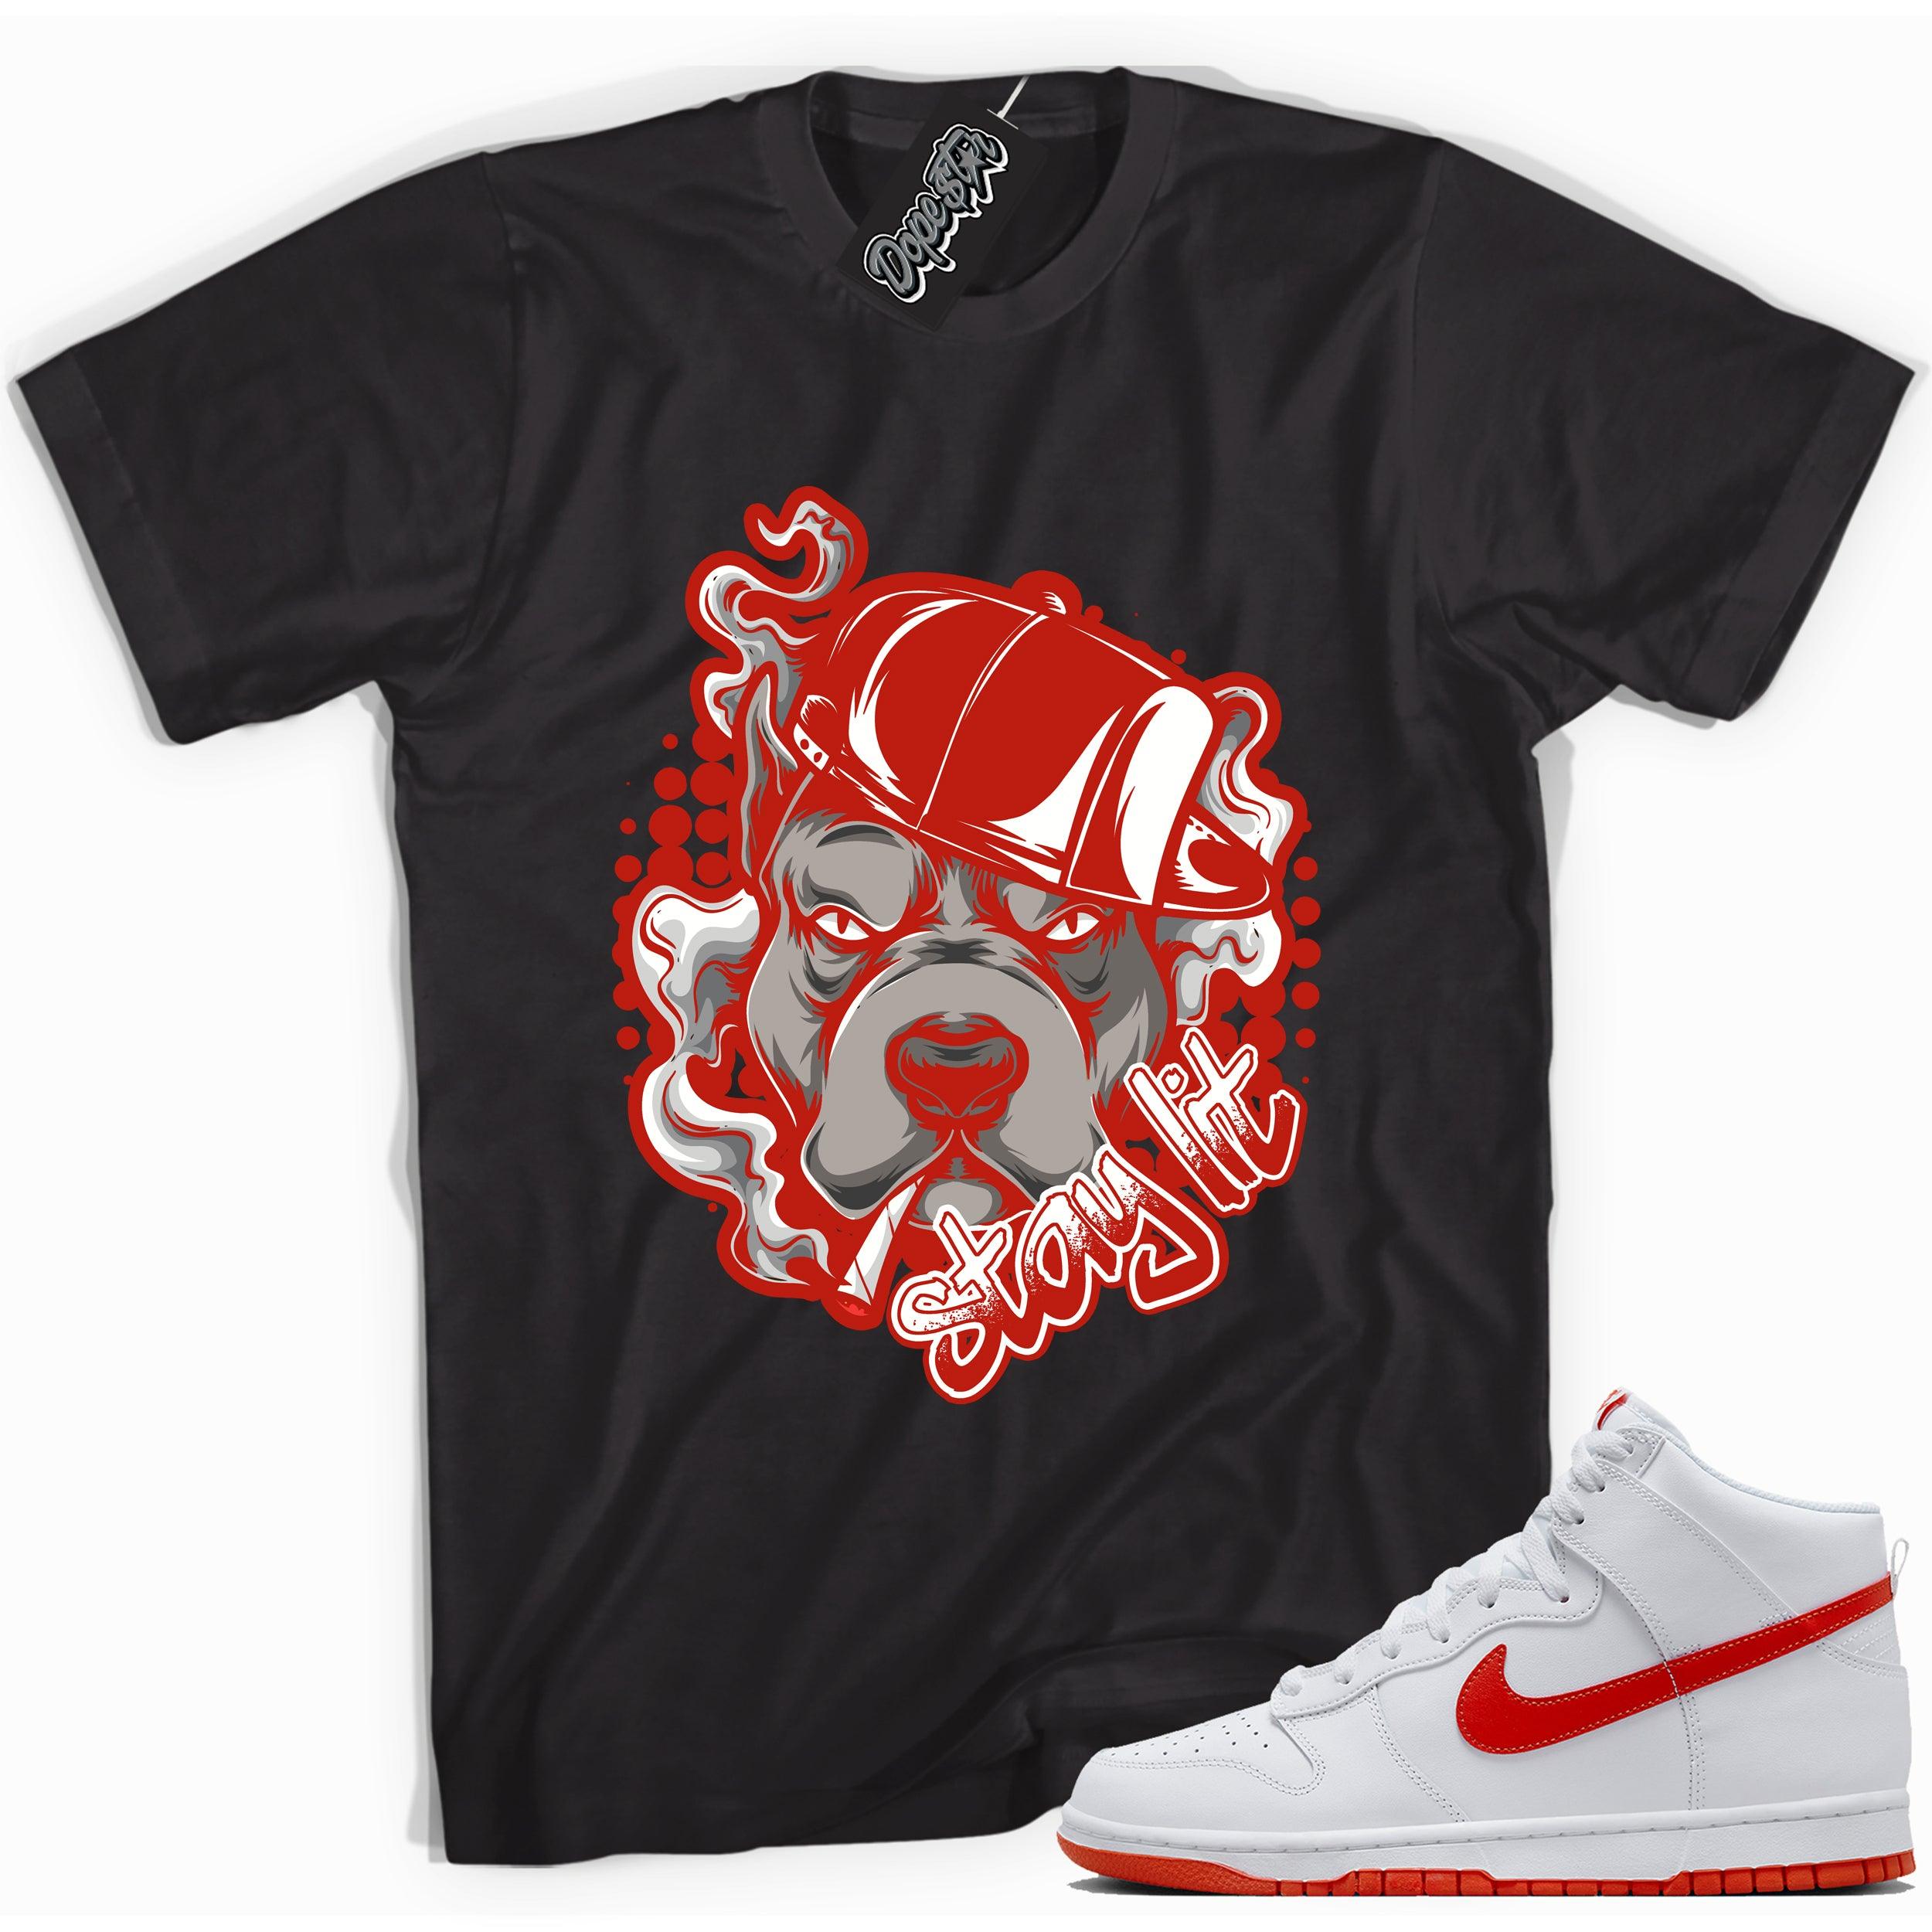 Cool black graphic tee with 'stay lit' print, that perfectly matches Nike Dunk High White Picante Red sneakers.